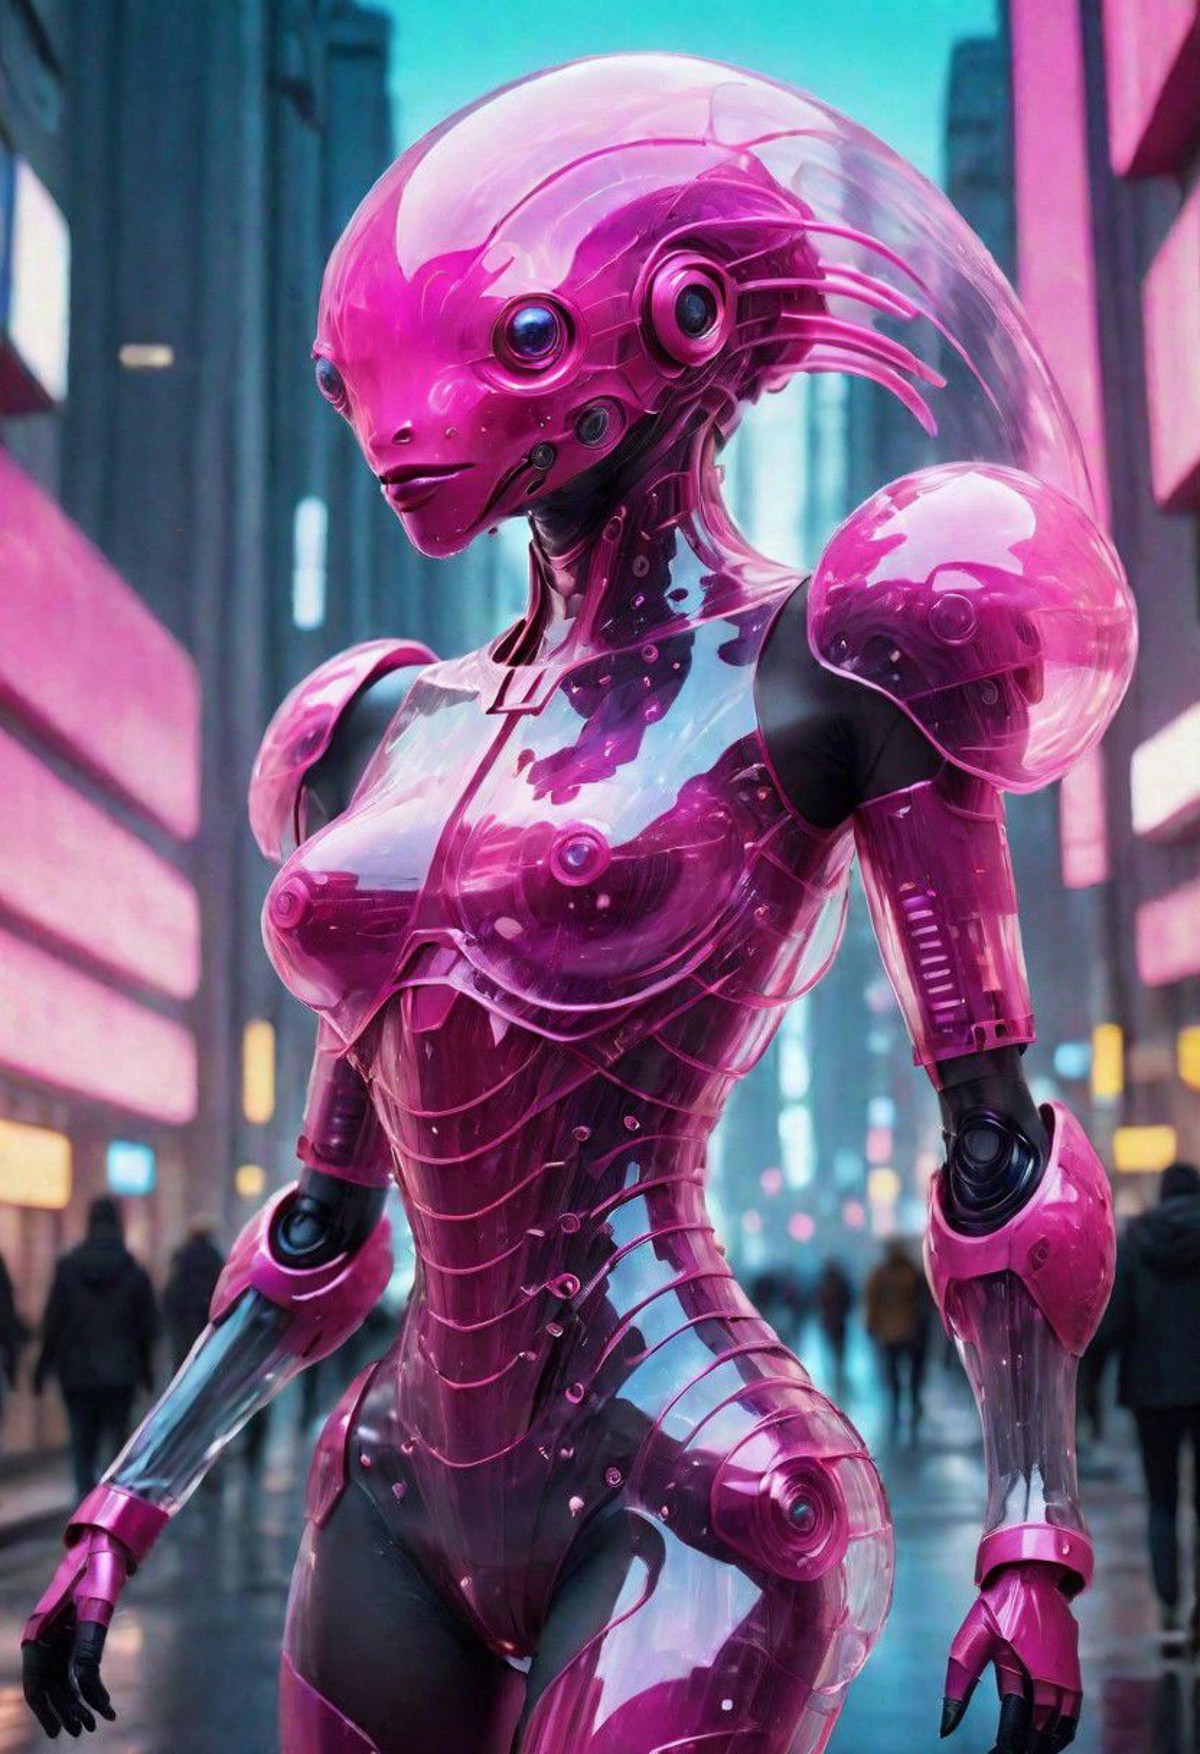 Girl walking in a futuristic city with semi-transparent cyberpunk clothing Fucshia de Gelatine the city has buildings from...